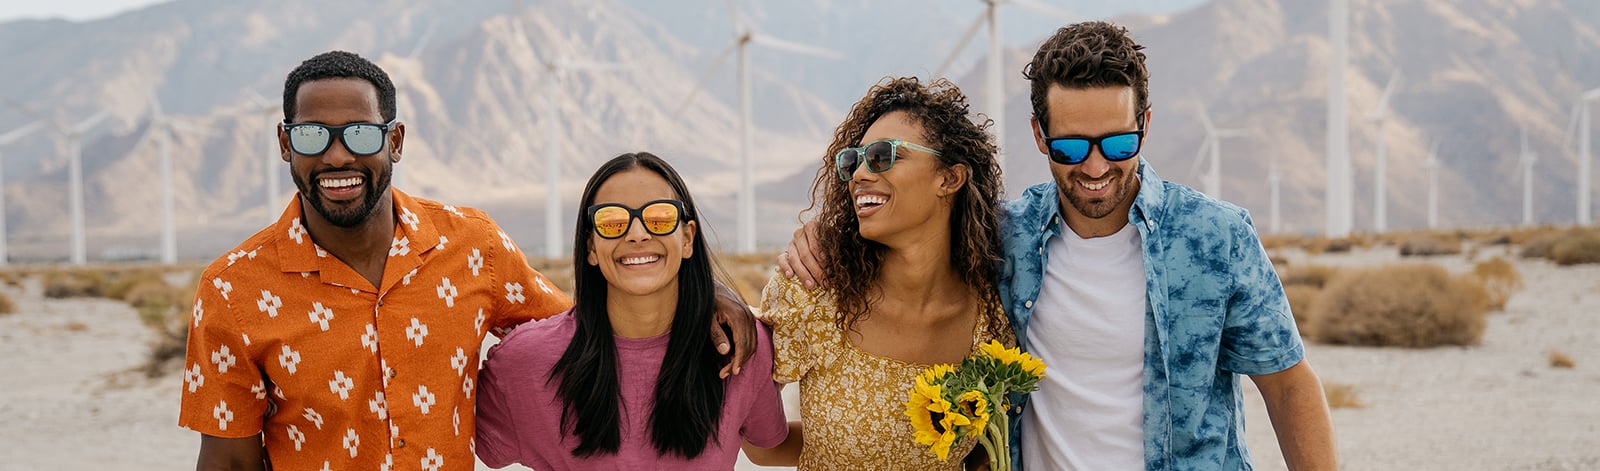 Four young people in Palm Springs wearing Knockaround sunglasses